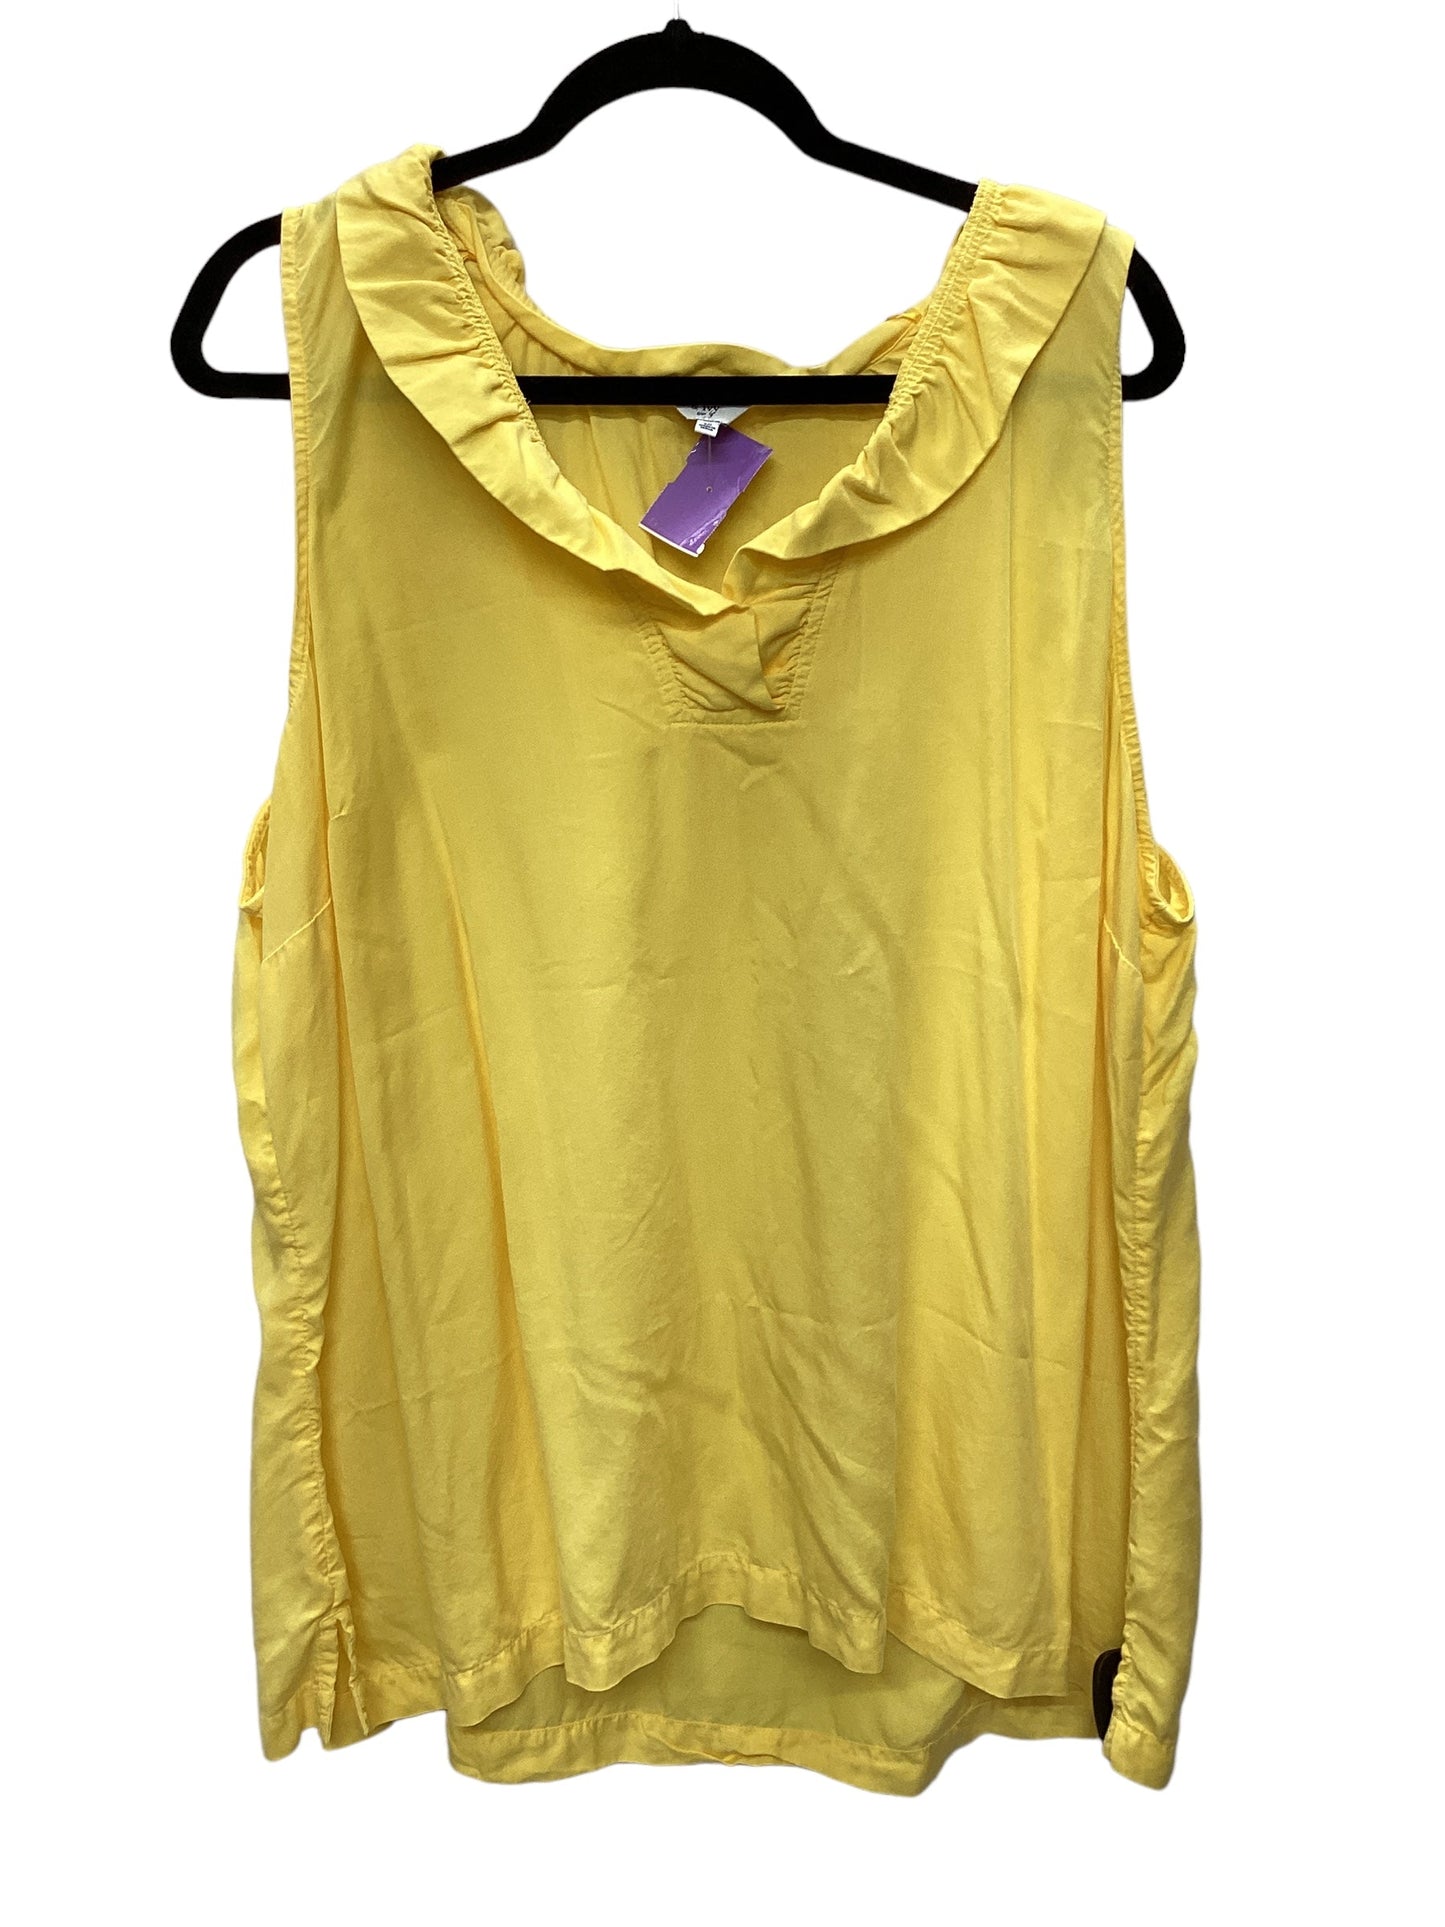 Yellow Top Sleeveless Crown And Ivy, Size 3x